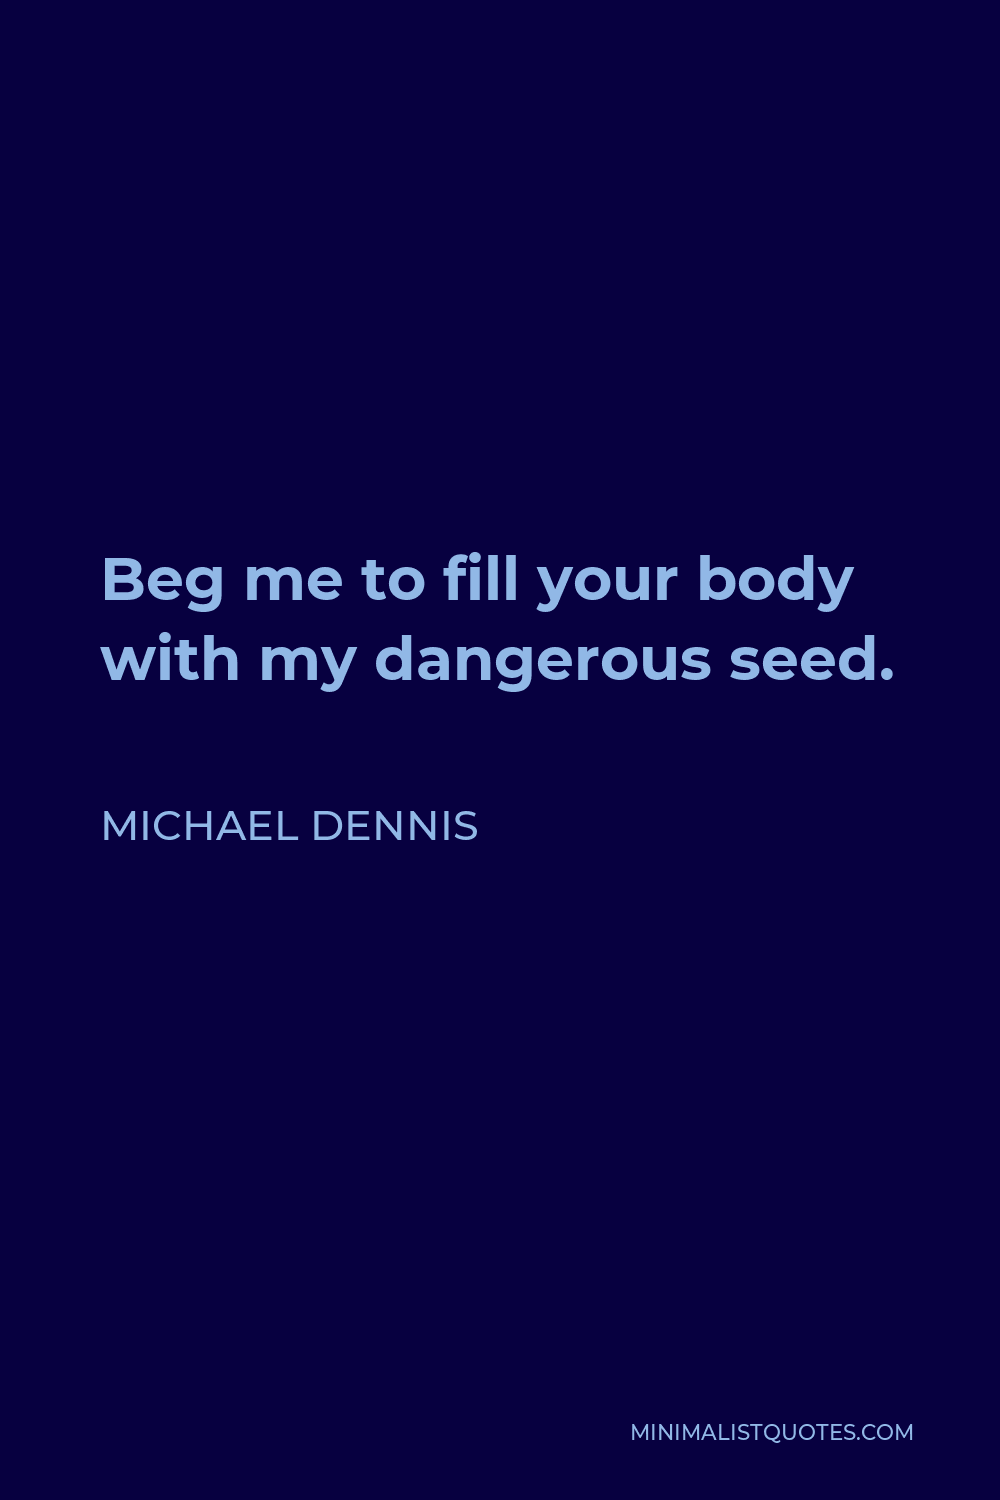 Michael Dennis Quote - Beg me to fill your body with my dangerous seed.